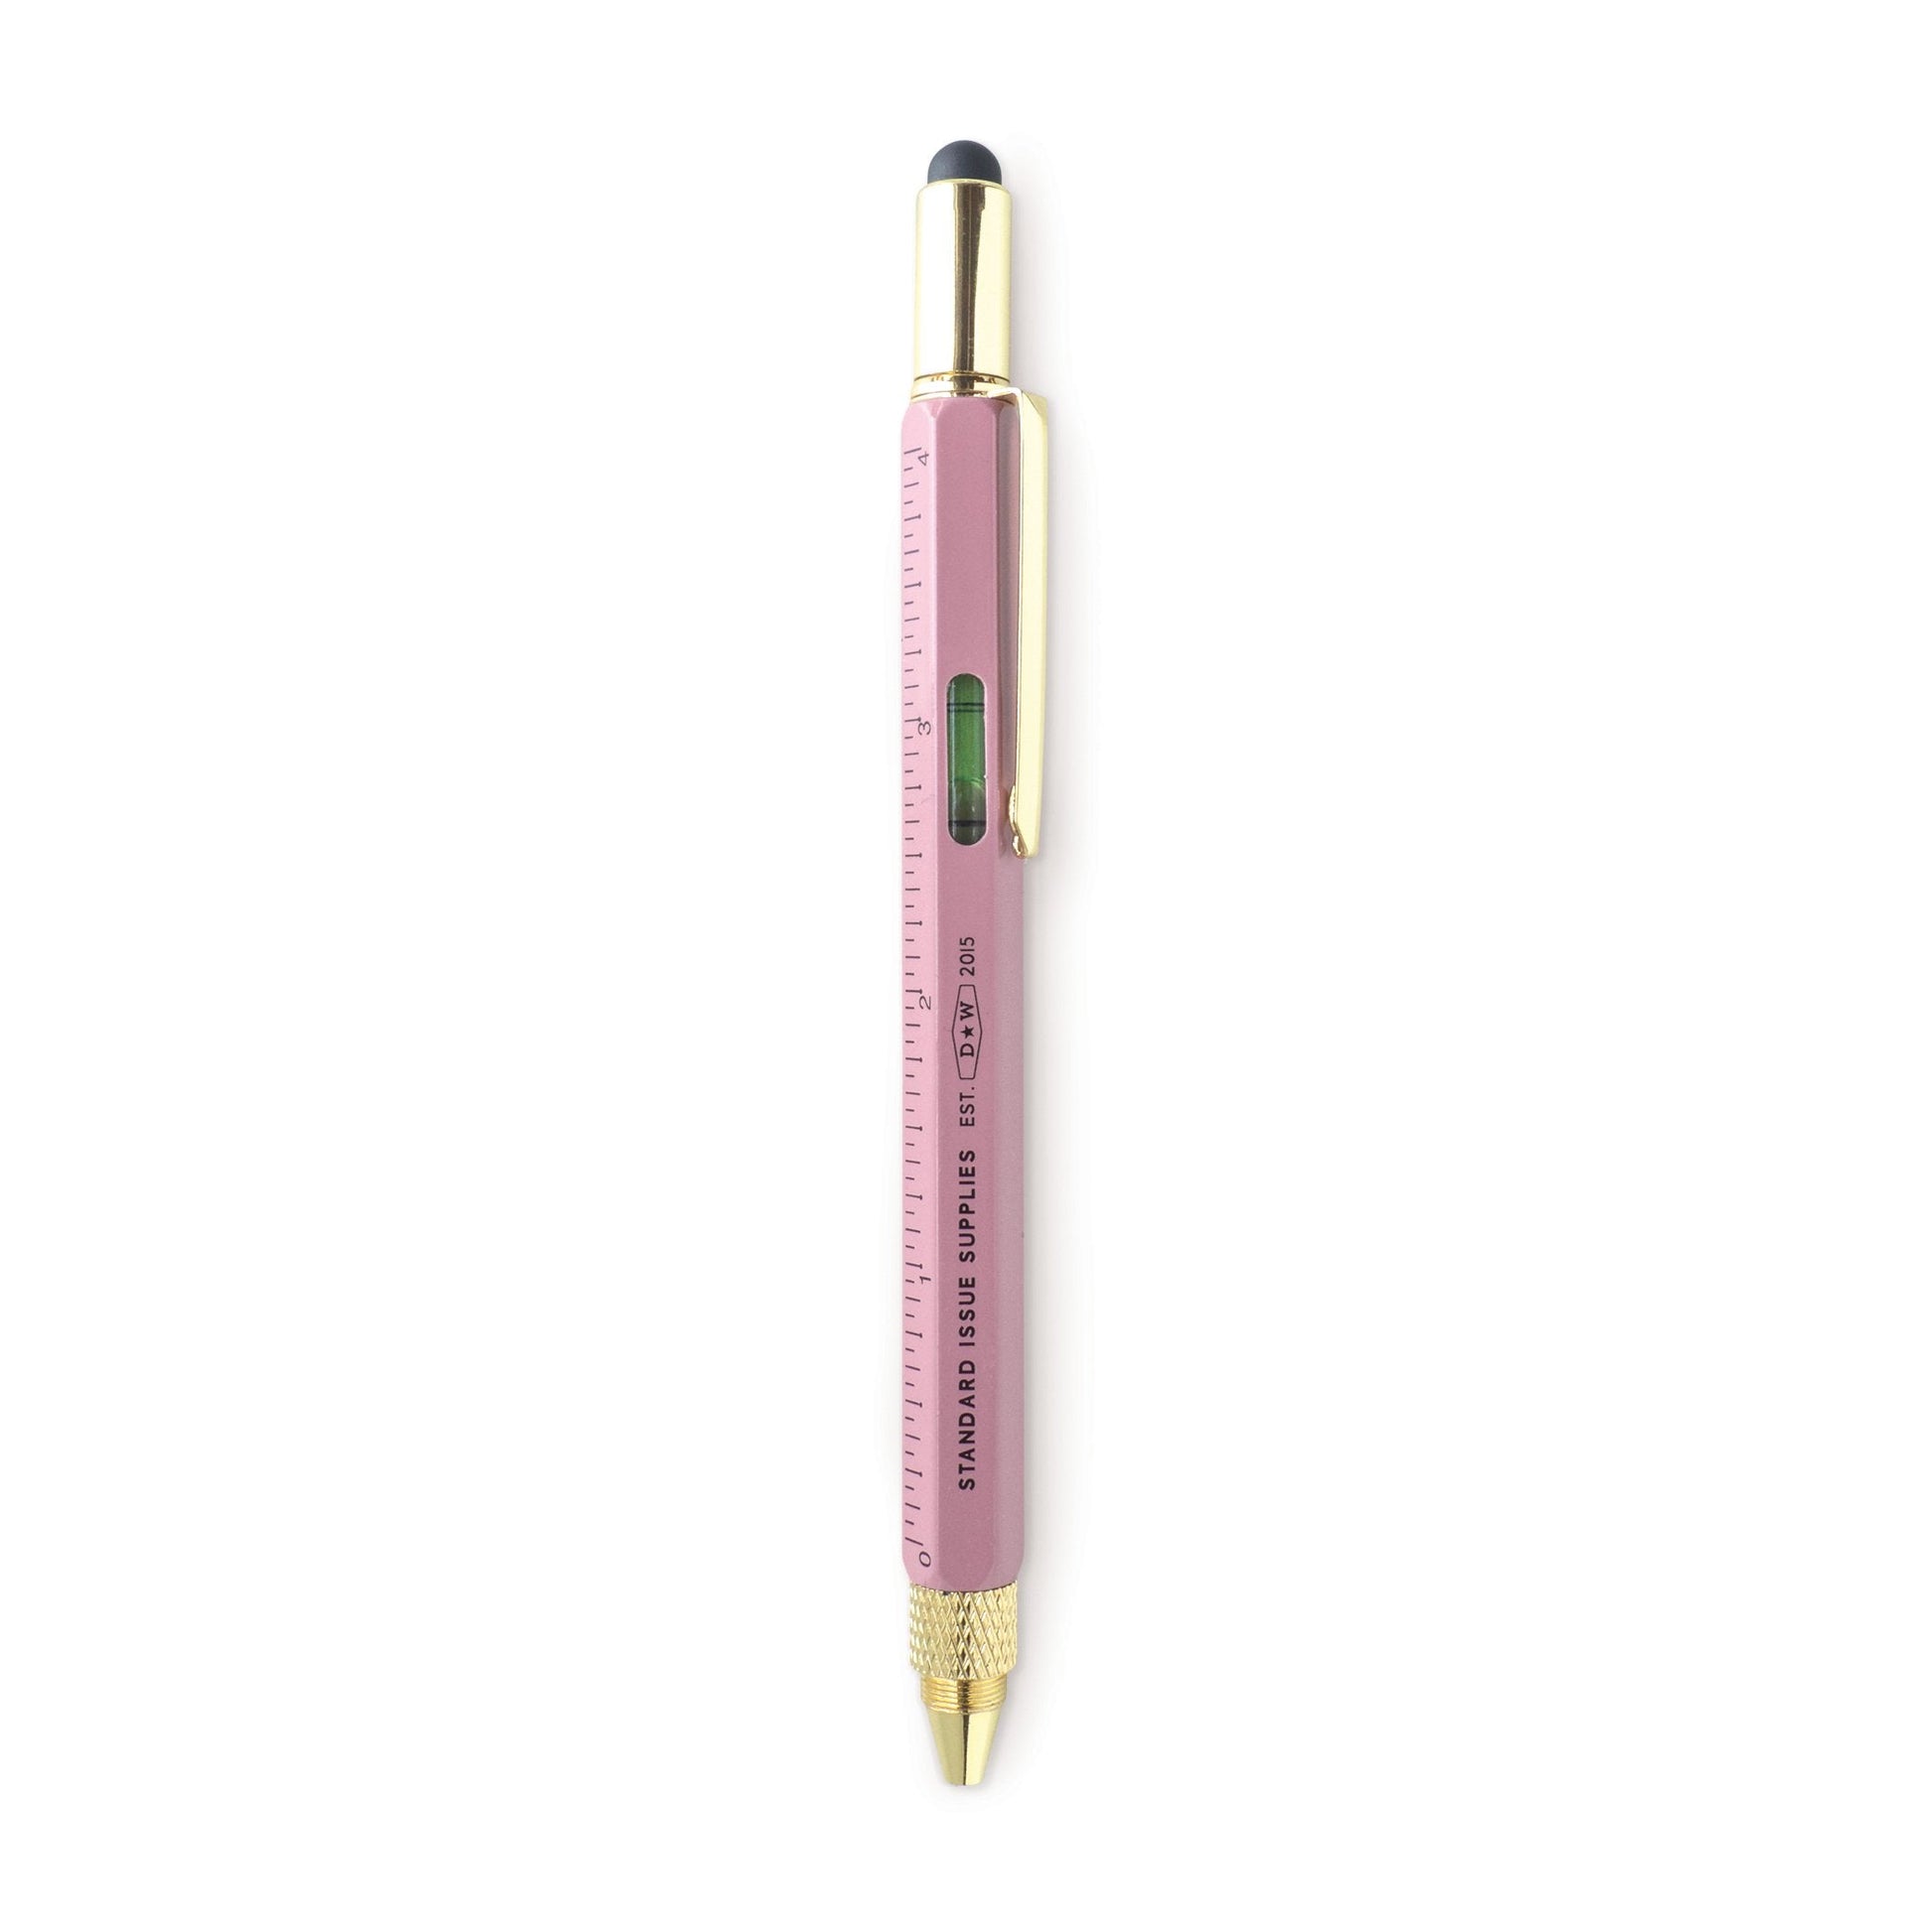 Pink tool multi function tool pen from the Pencil Me In stationery shop